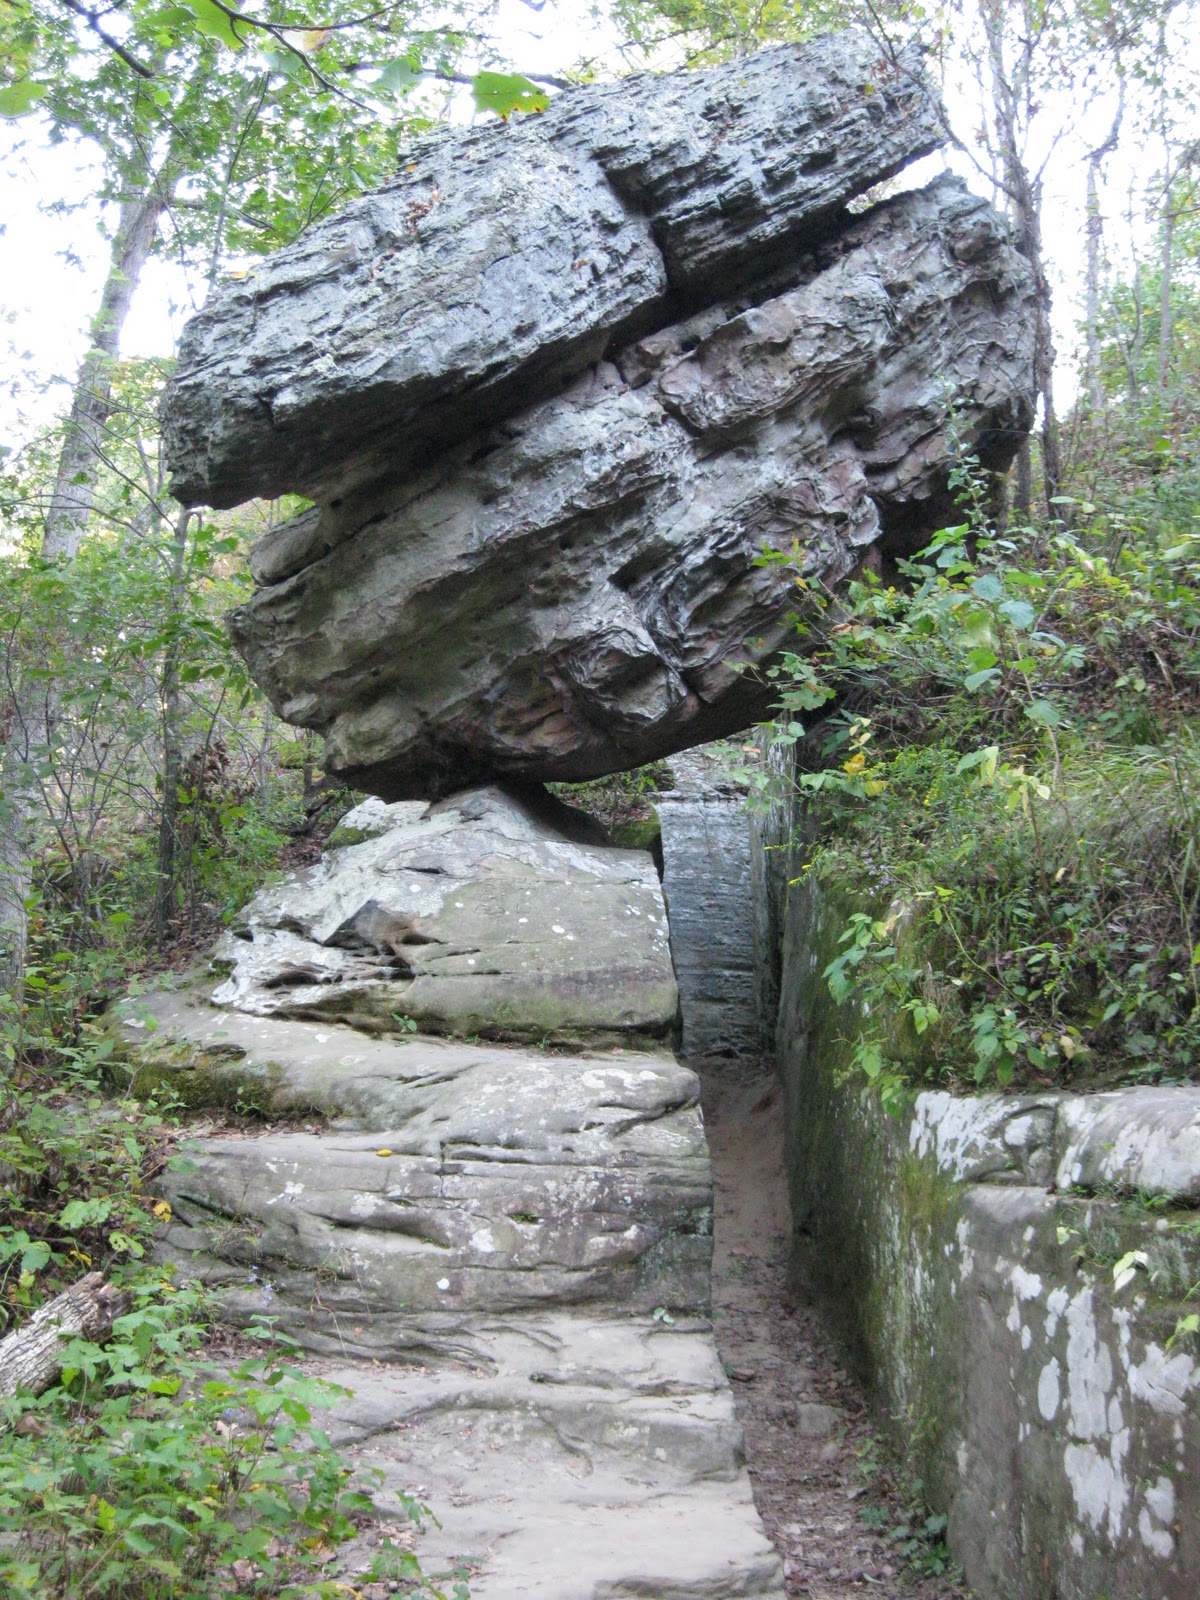 Large rock in Shawnee National Forest